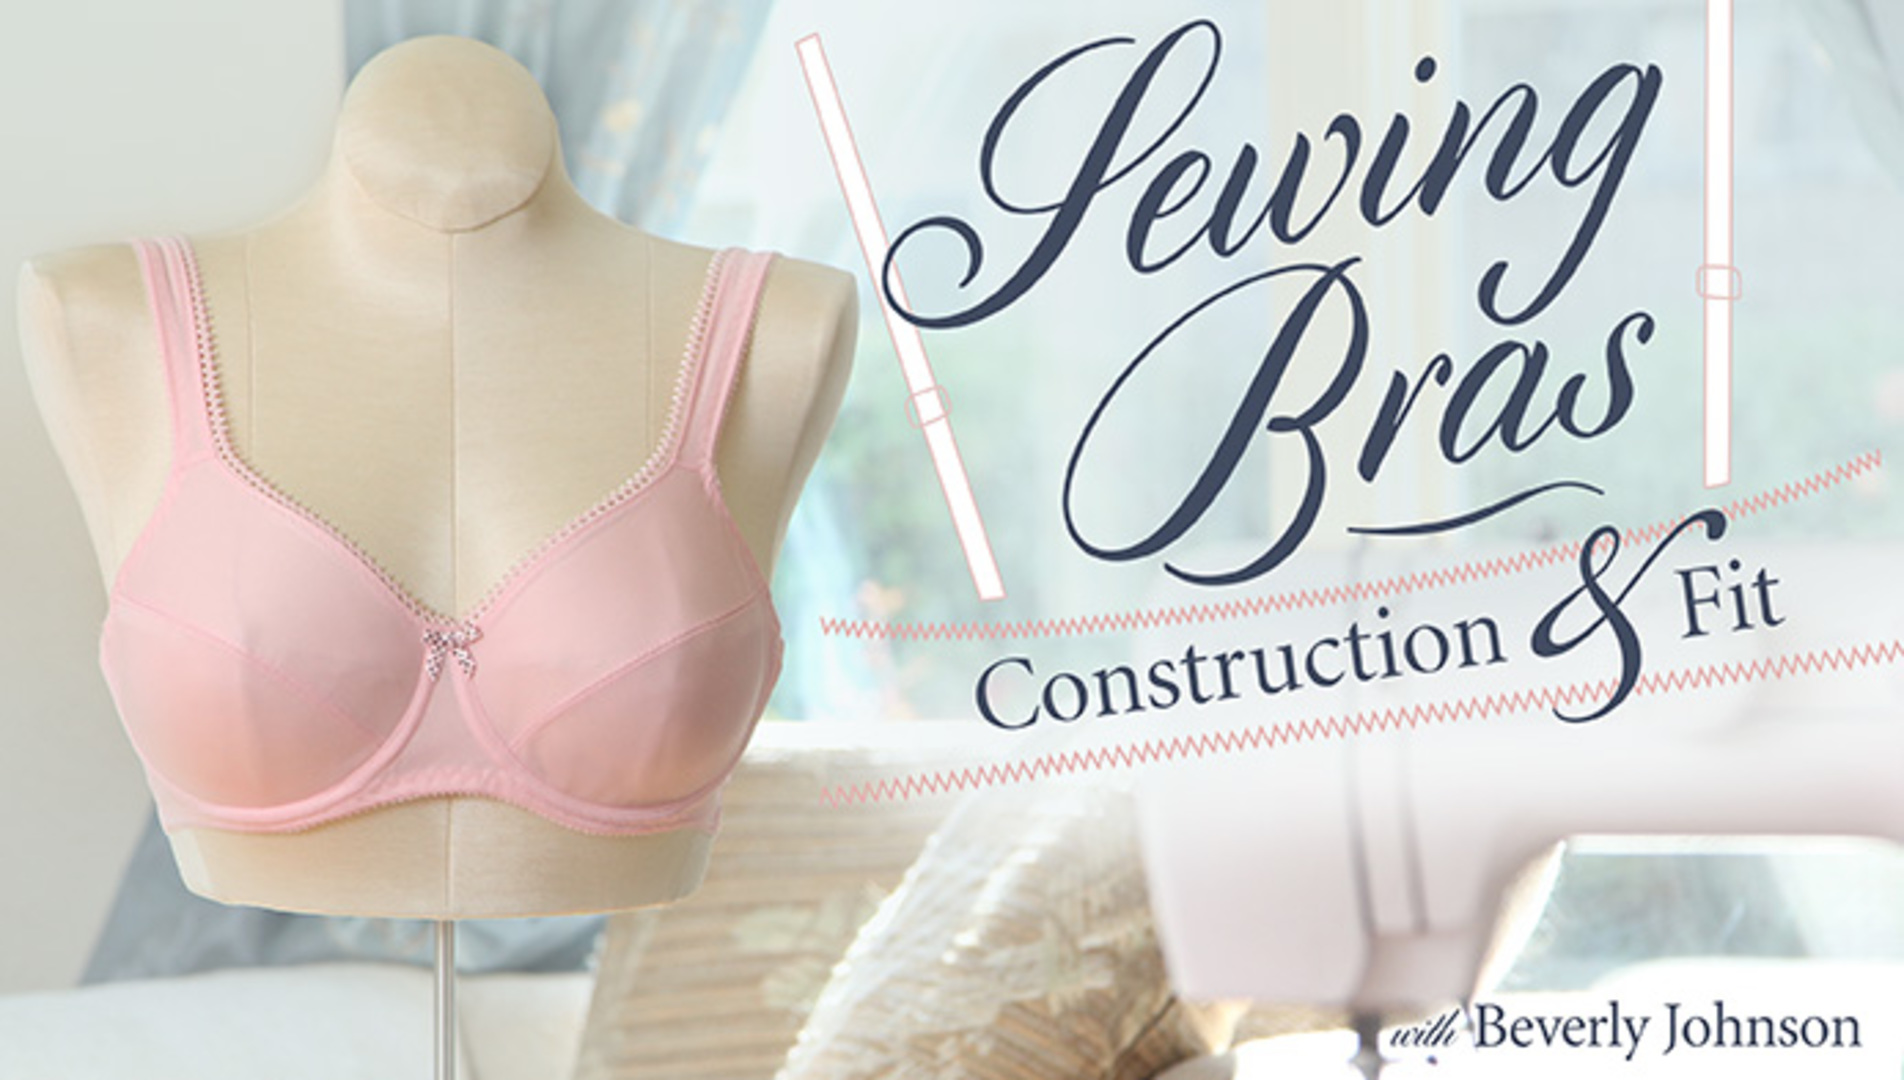 Bra-makers Manual: A Professional Approach to Bra Design, Draft, Fit and  Construction from CorsetMakingSupplies.com